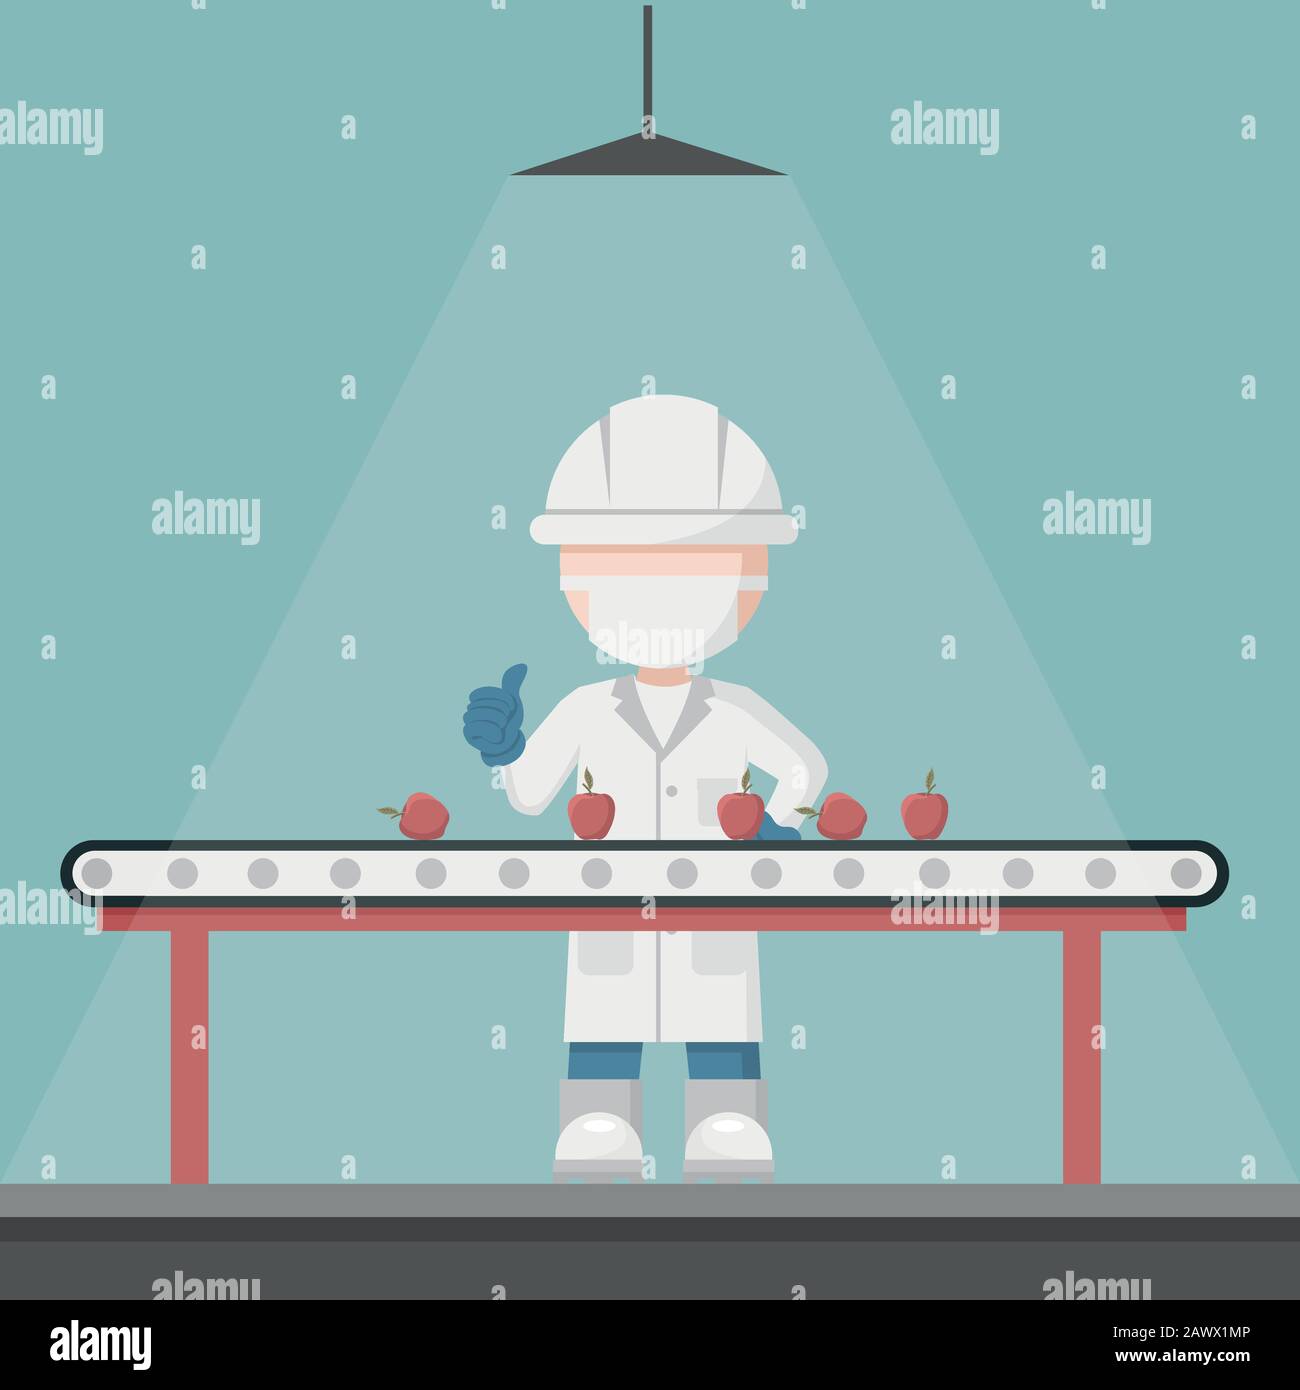 Quality control supervisor in a fruit selection production line. Food Conveyor Belt Stock Vector